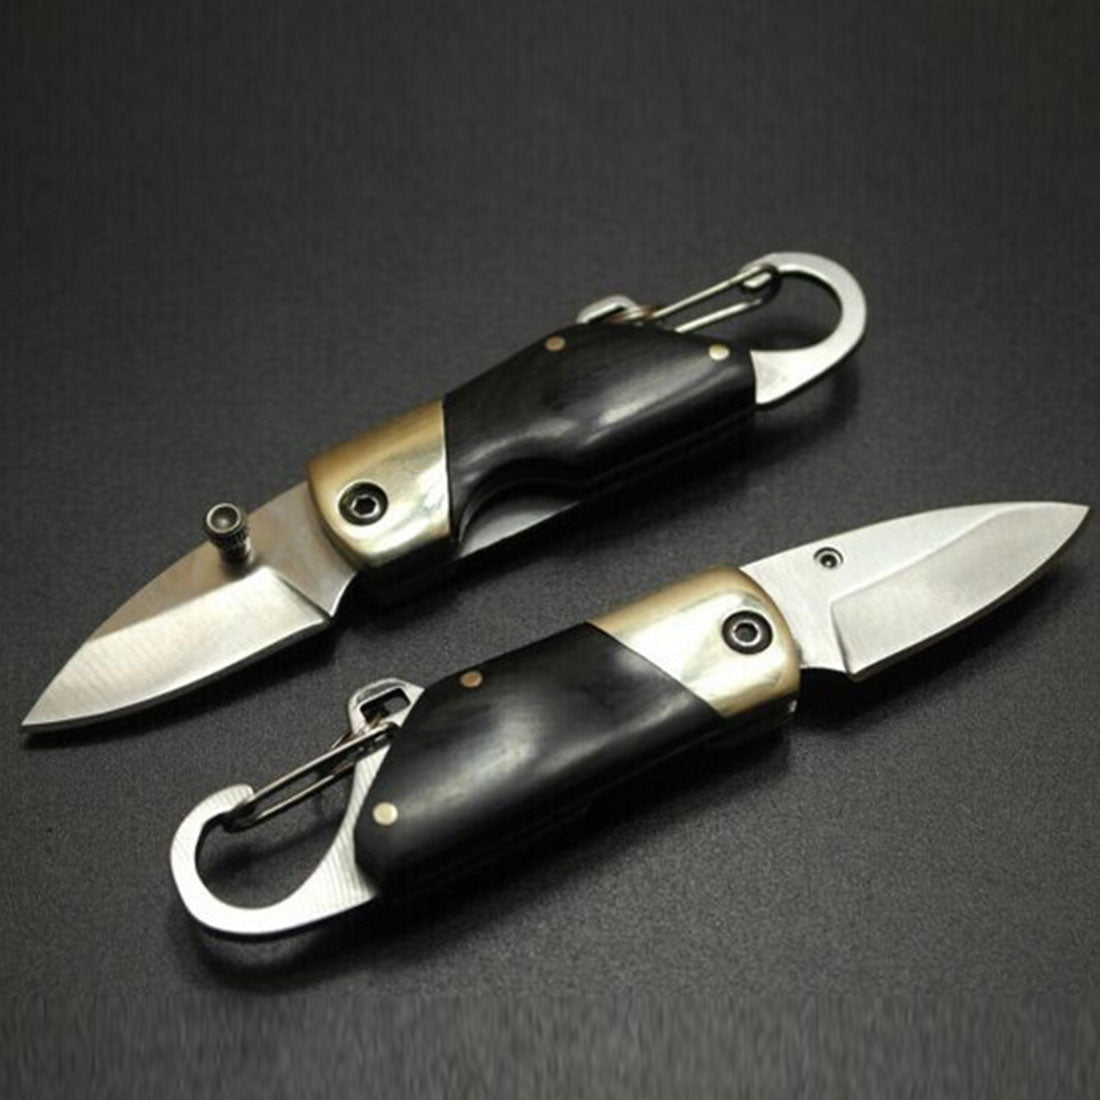 Mini Ring Knife Utility Stainless Steel Outdoor Survival Pocket